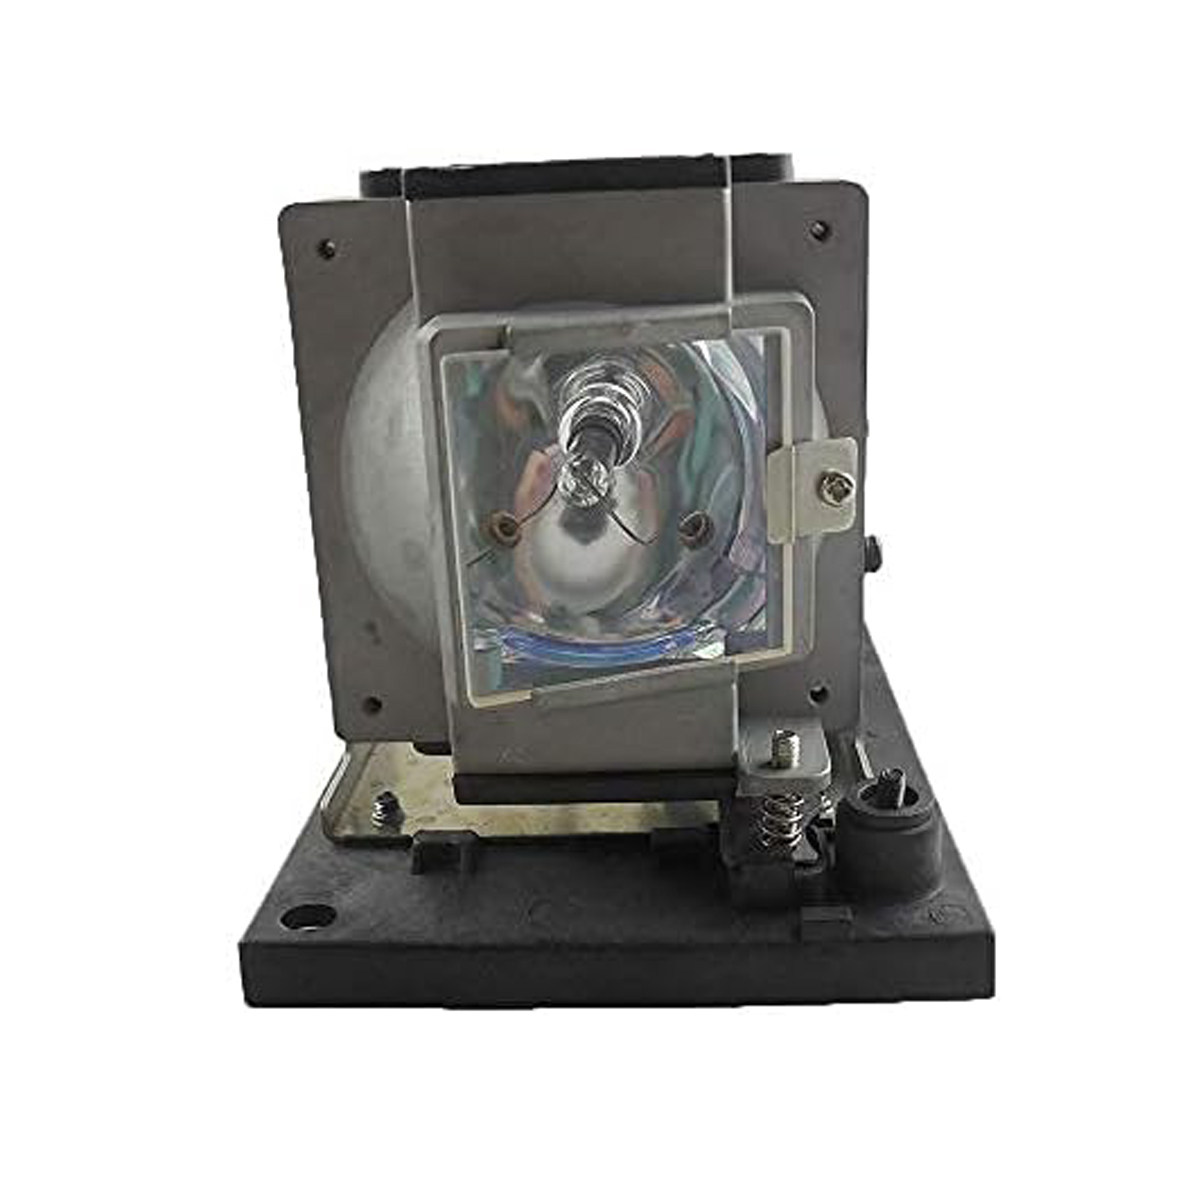 Replacement Projector lamp AN-PH50LP1 For SHARP XG-PH50X